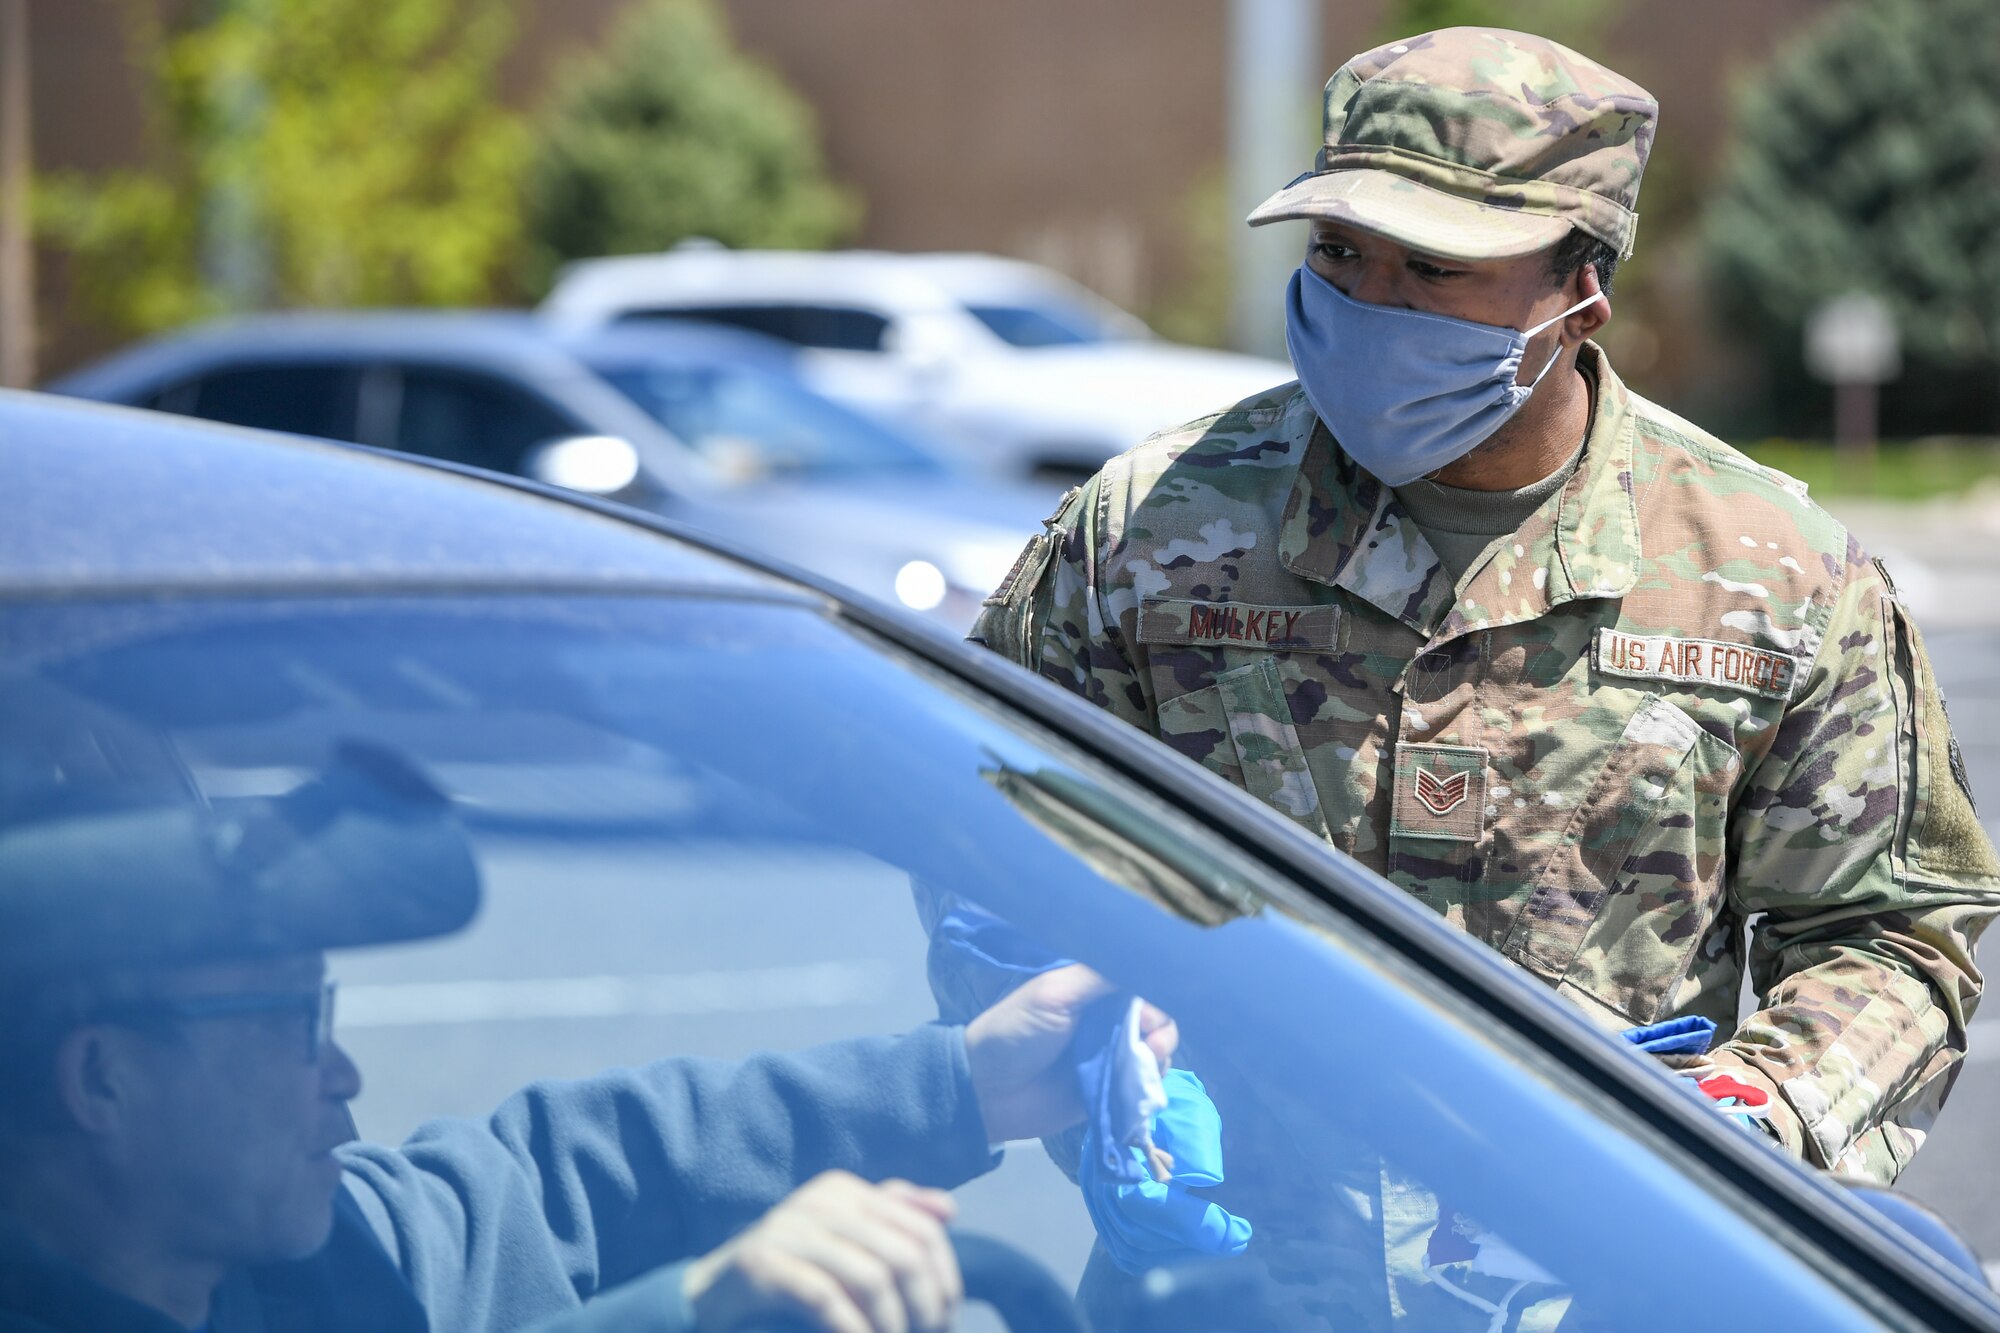 Staff. Sgt. Nicklas Mulkey, 75th Air Base Wing, hands out cloth masks to military and civilian Airmen April 28, 2020, at Hill Air Force Base, Utah. Around 4,000 masks, most donated from nearby communities and also from the 531st Armament Textile Shop, were given out to Team Hill to keep safe and healthy during the COVID-19 pandemic. (U.S. Air Force photo by Cynthia Griggs)